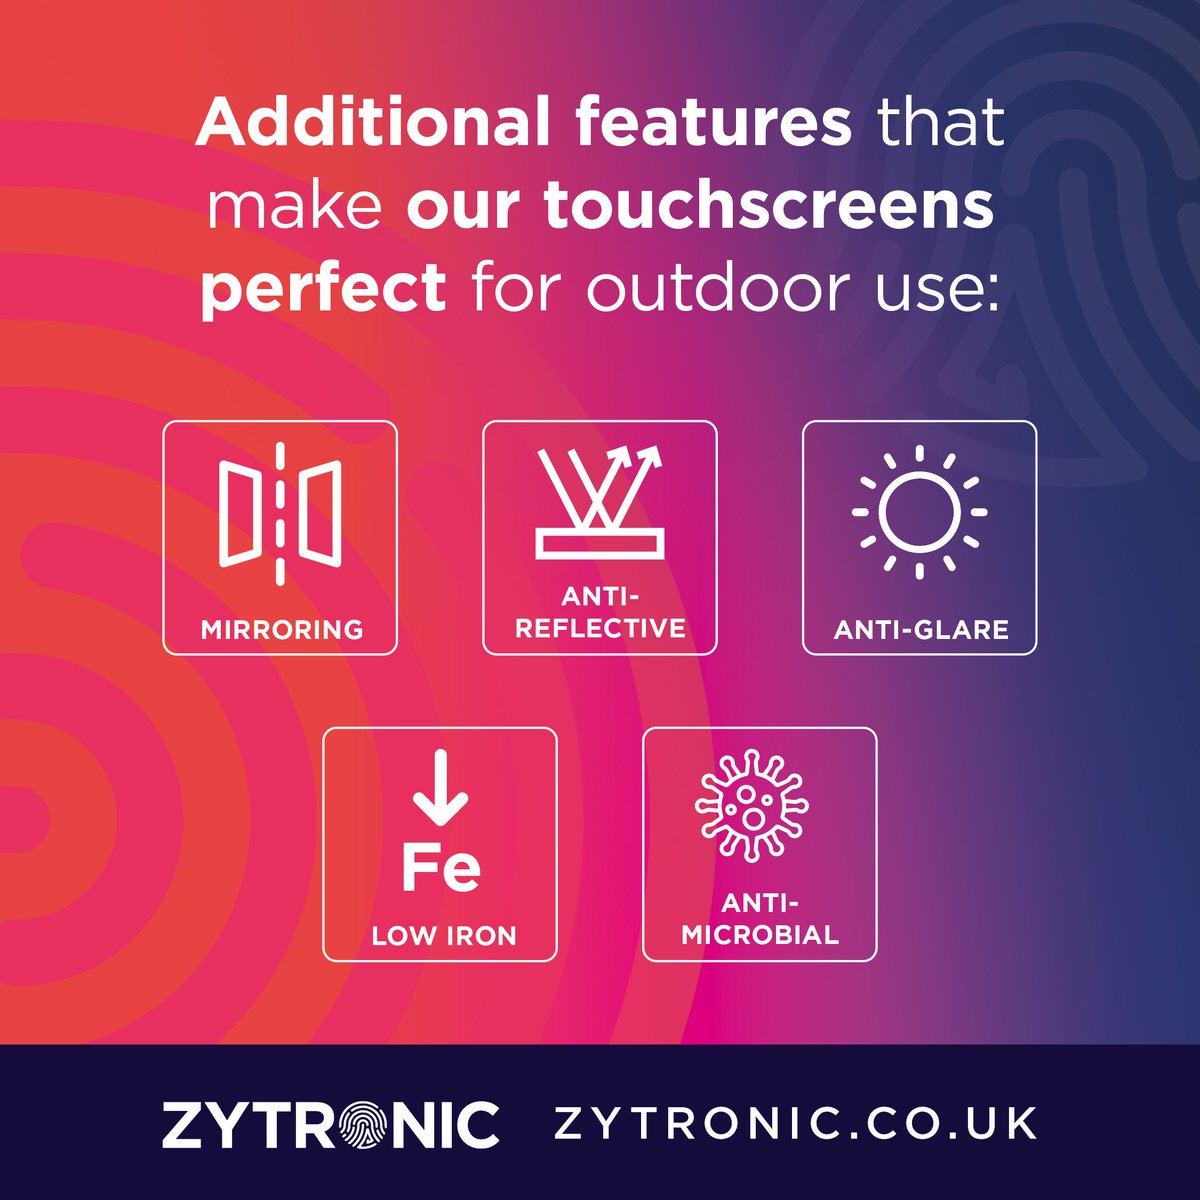 Our #touchscreen solutions are perfect for outdoor use. We can add a number of specialist features, such as anti-reflective and anti-glare #glass to minimise the effects of sunlight on your touchscreen. Find out more: zytronic.co.uk/contact/ #Technology #UKManufacturer